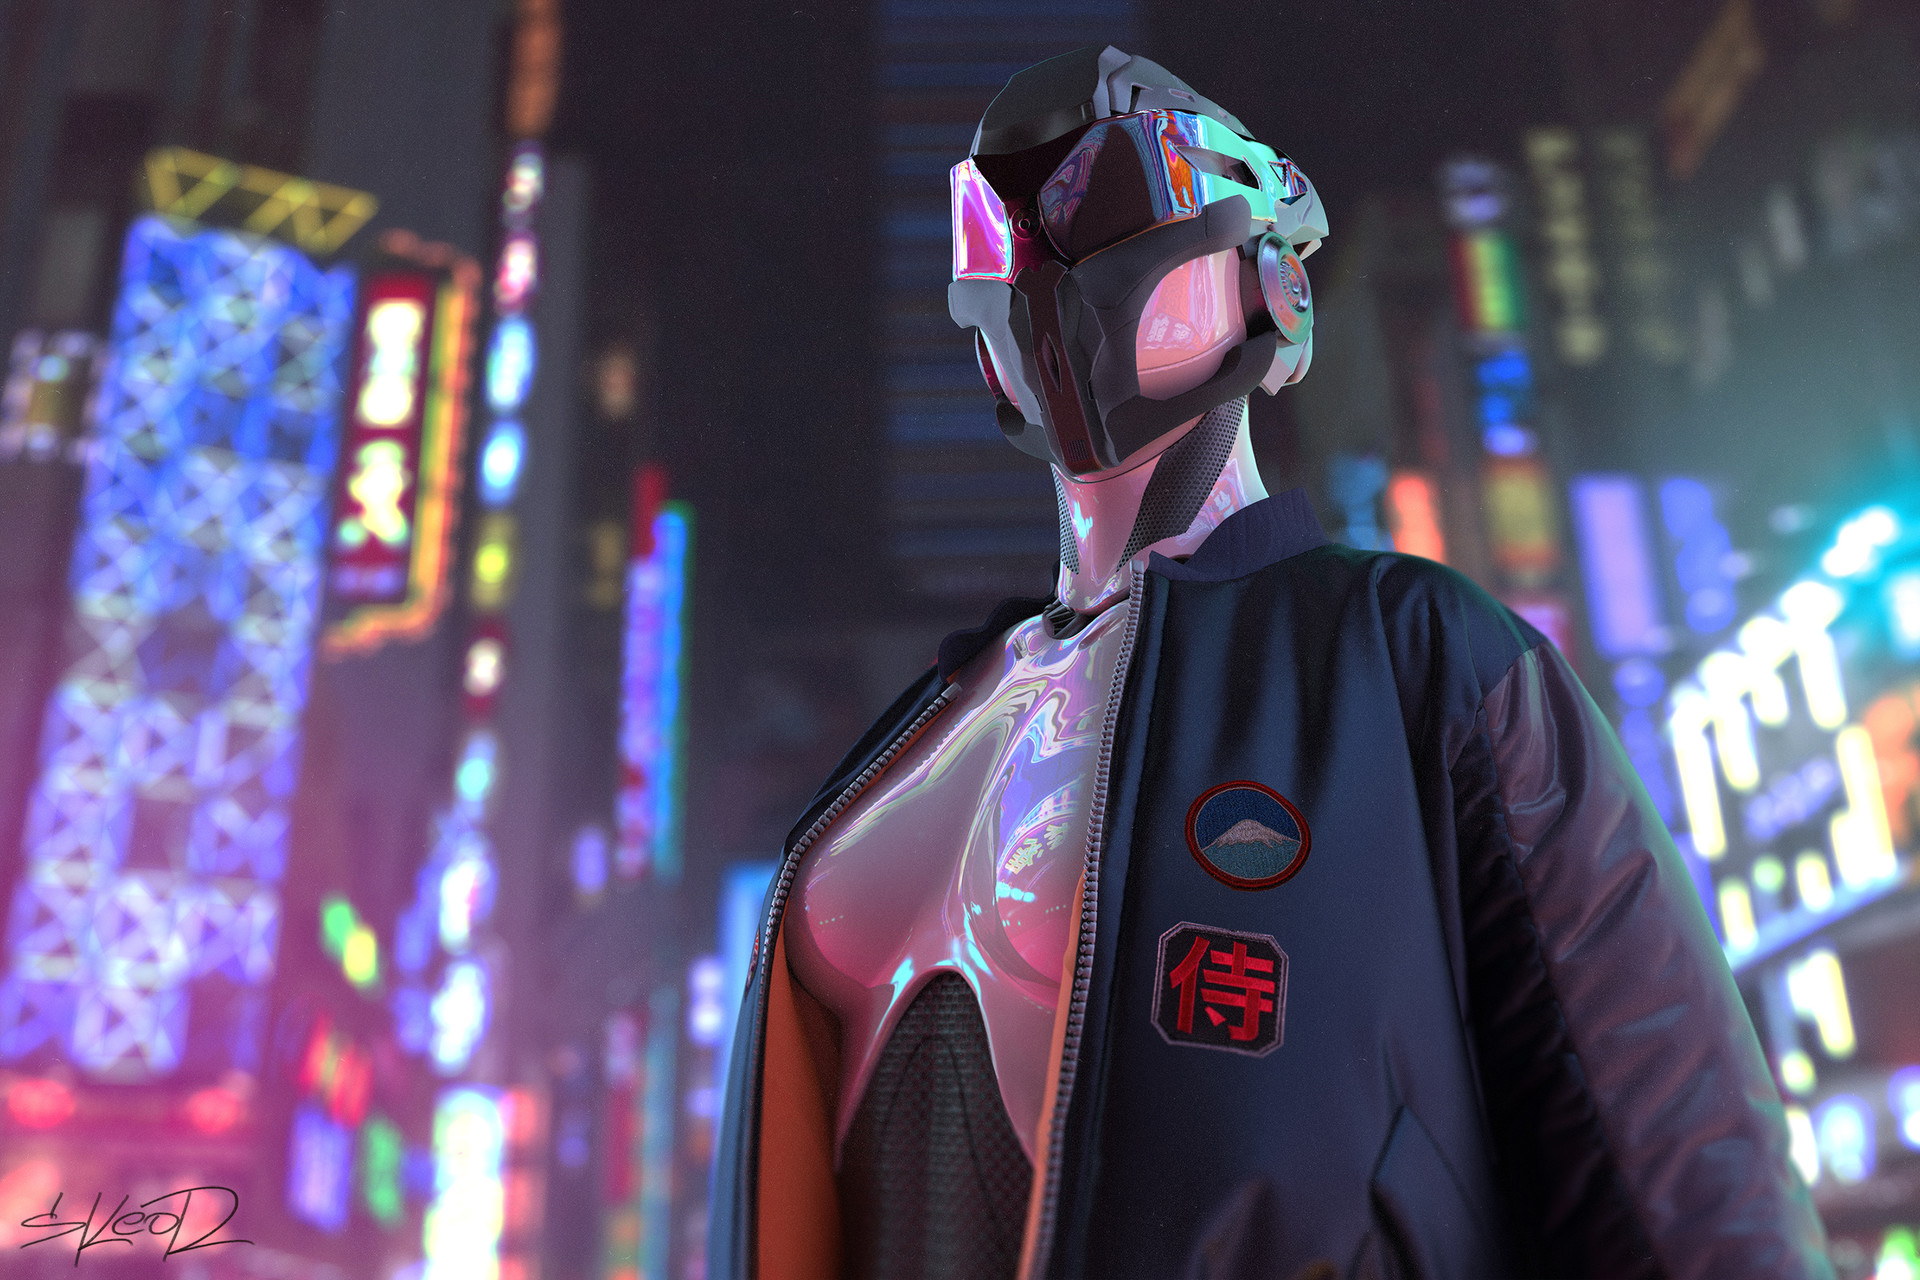 General 1920x1280 robot futuristic futuristic city digital art Tony Skeor low-angle cyberpunk open jacket blurred blurry background open clothes boobs jacket city building city lights